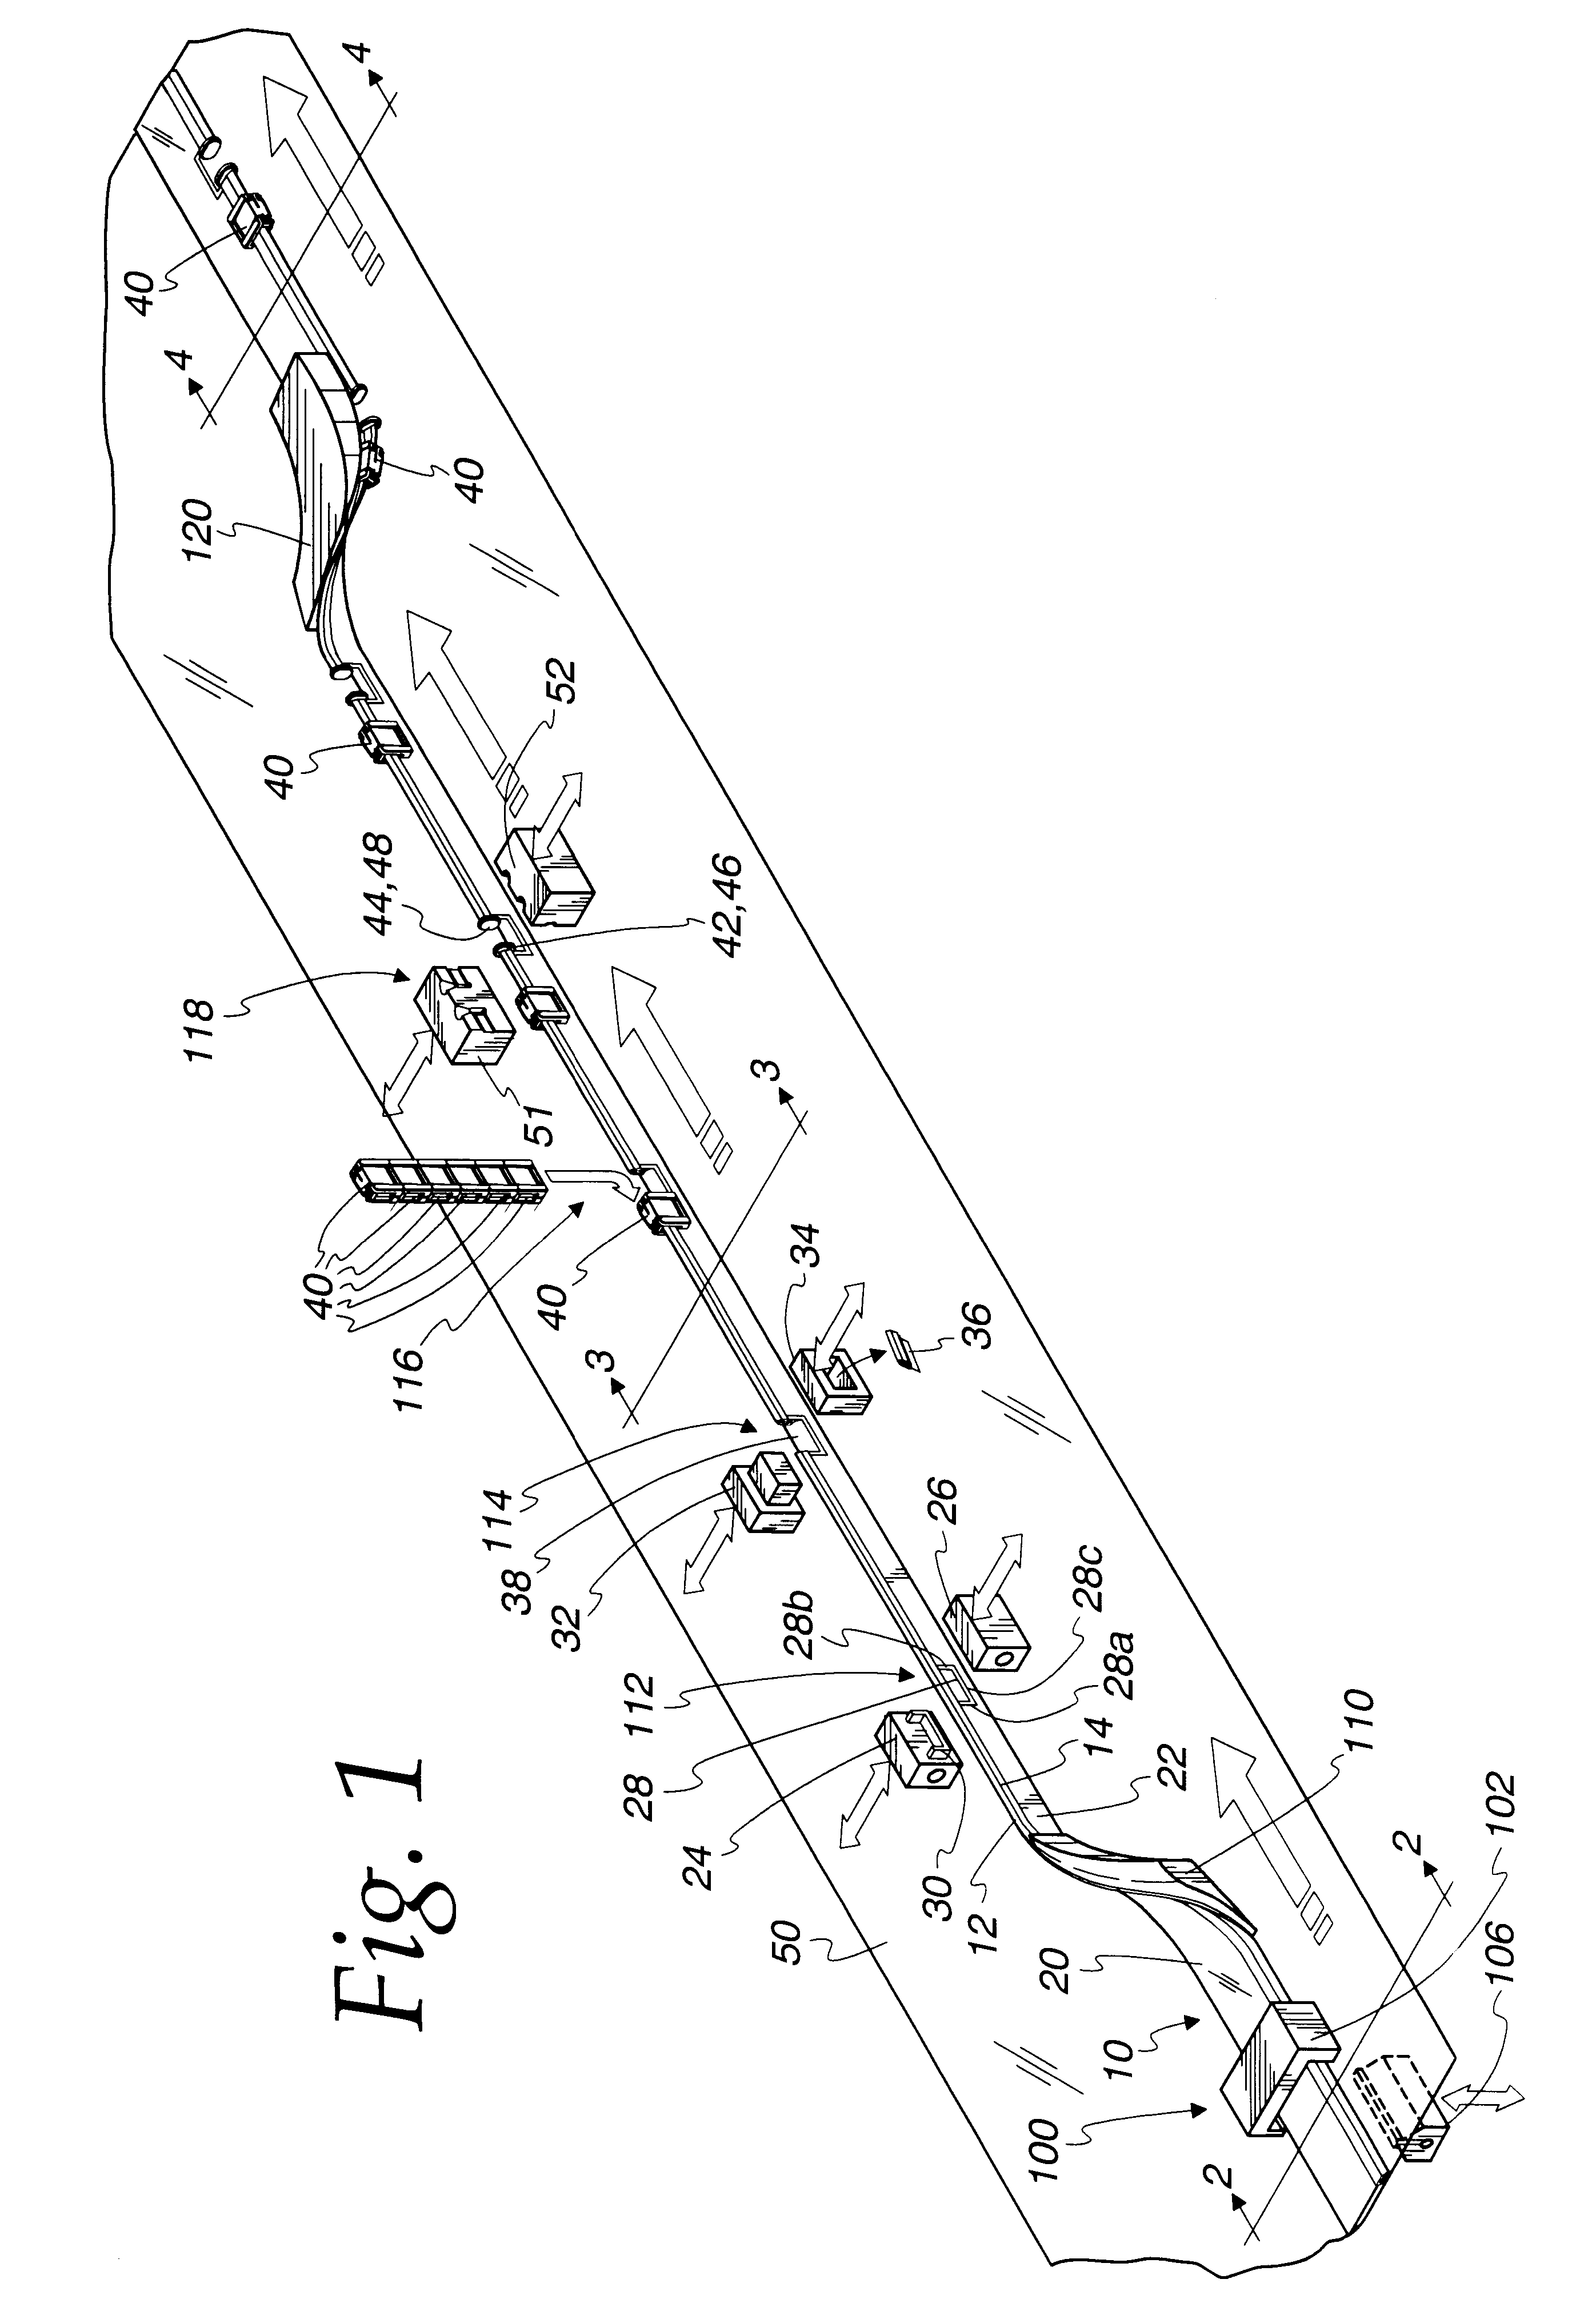 Method of applying a slider to a fastener-carrying plastic web